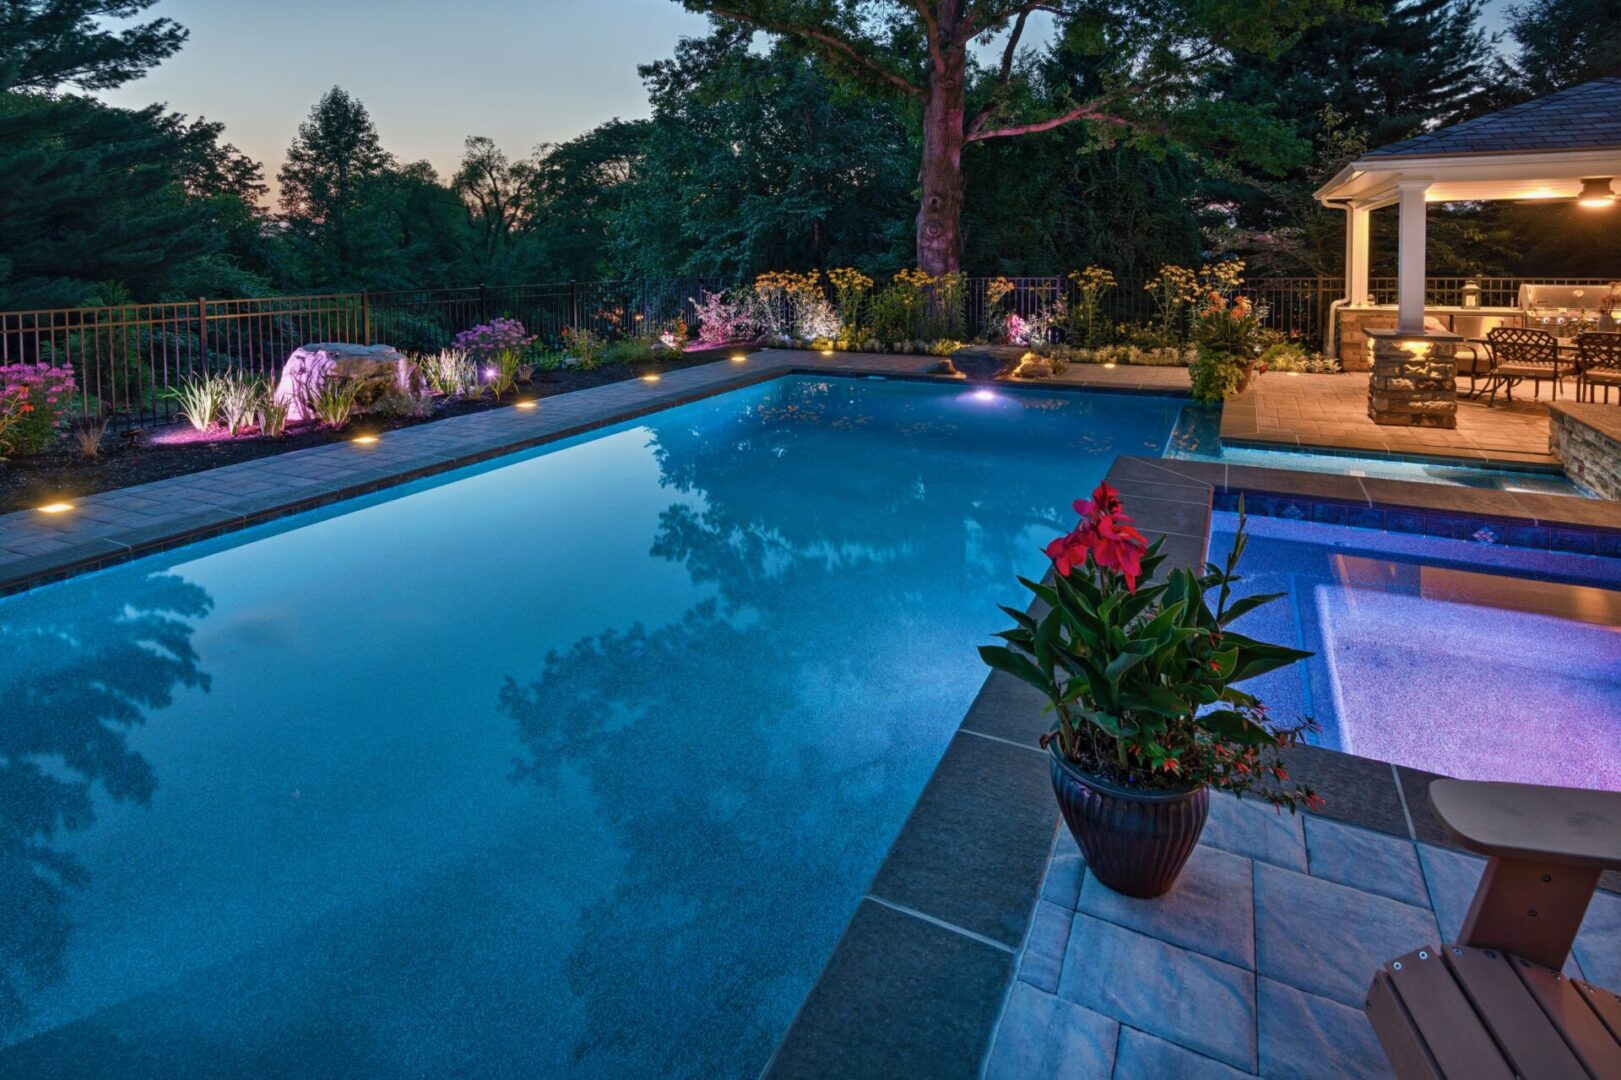 A pool with lights and plants in the middle of it